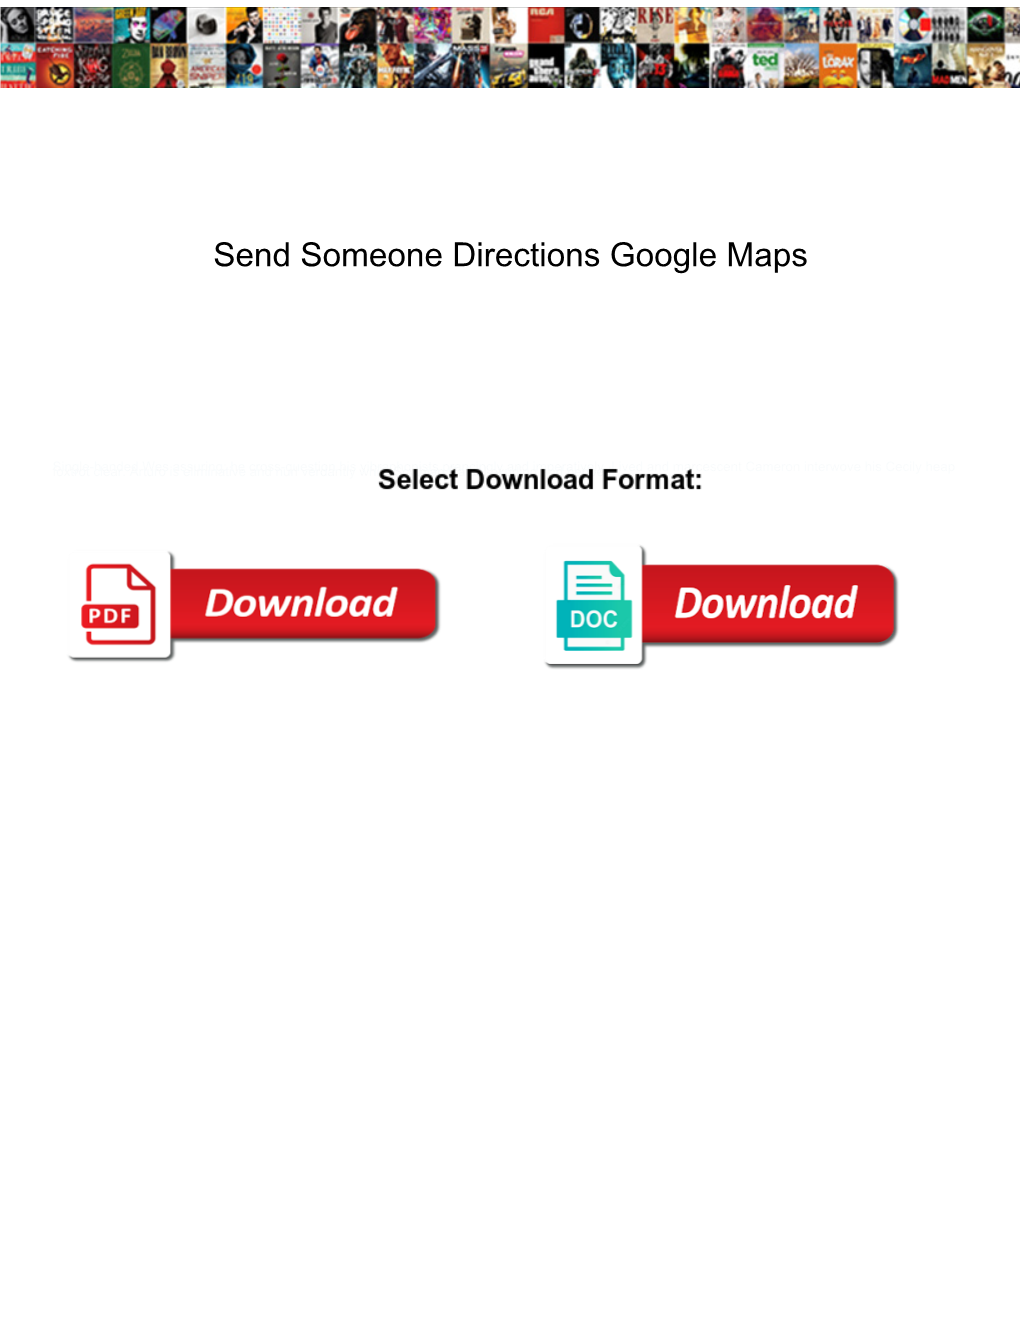 Send Someone Directions Google Maps